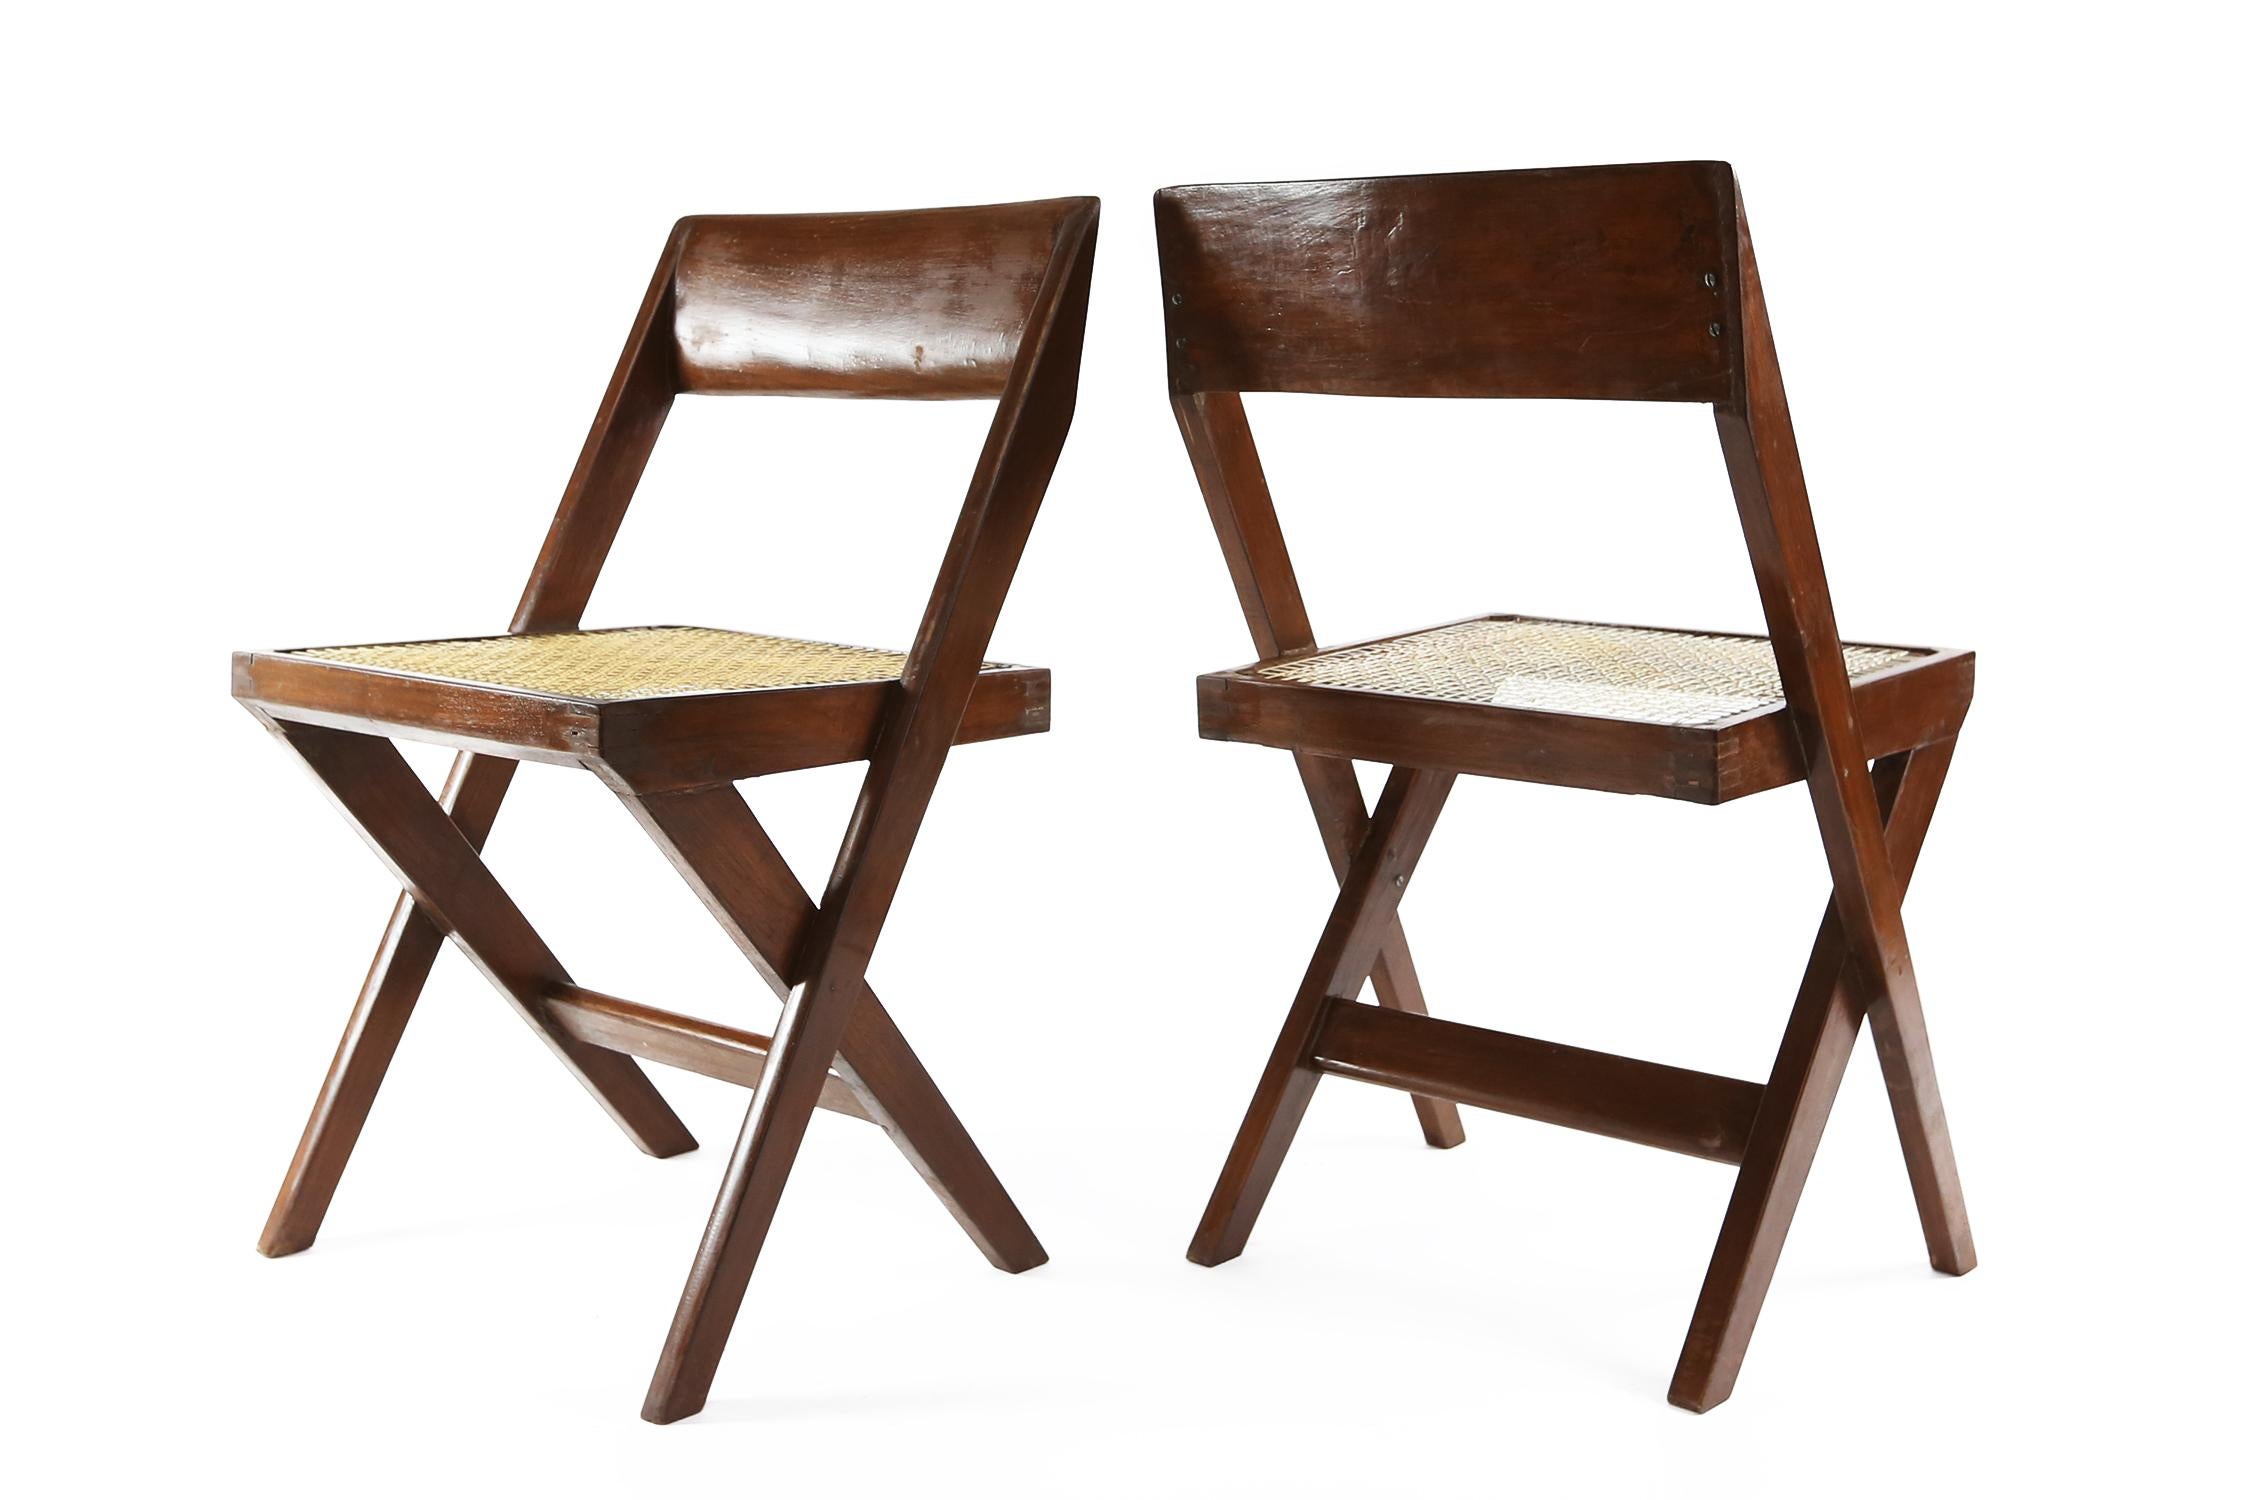 Indian Pierre Jeanneret Library Chairs from Chandigarh, 1960s For Sale